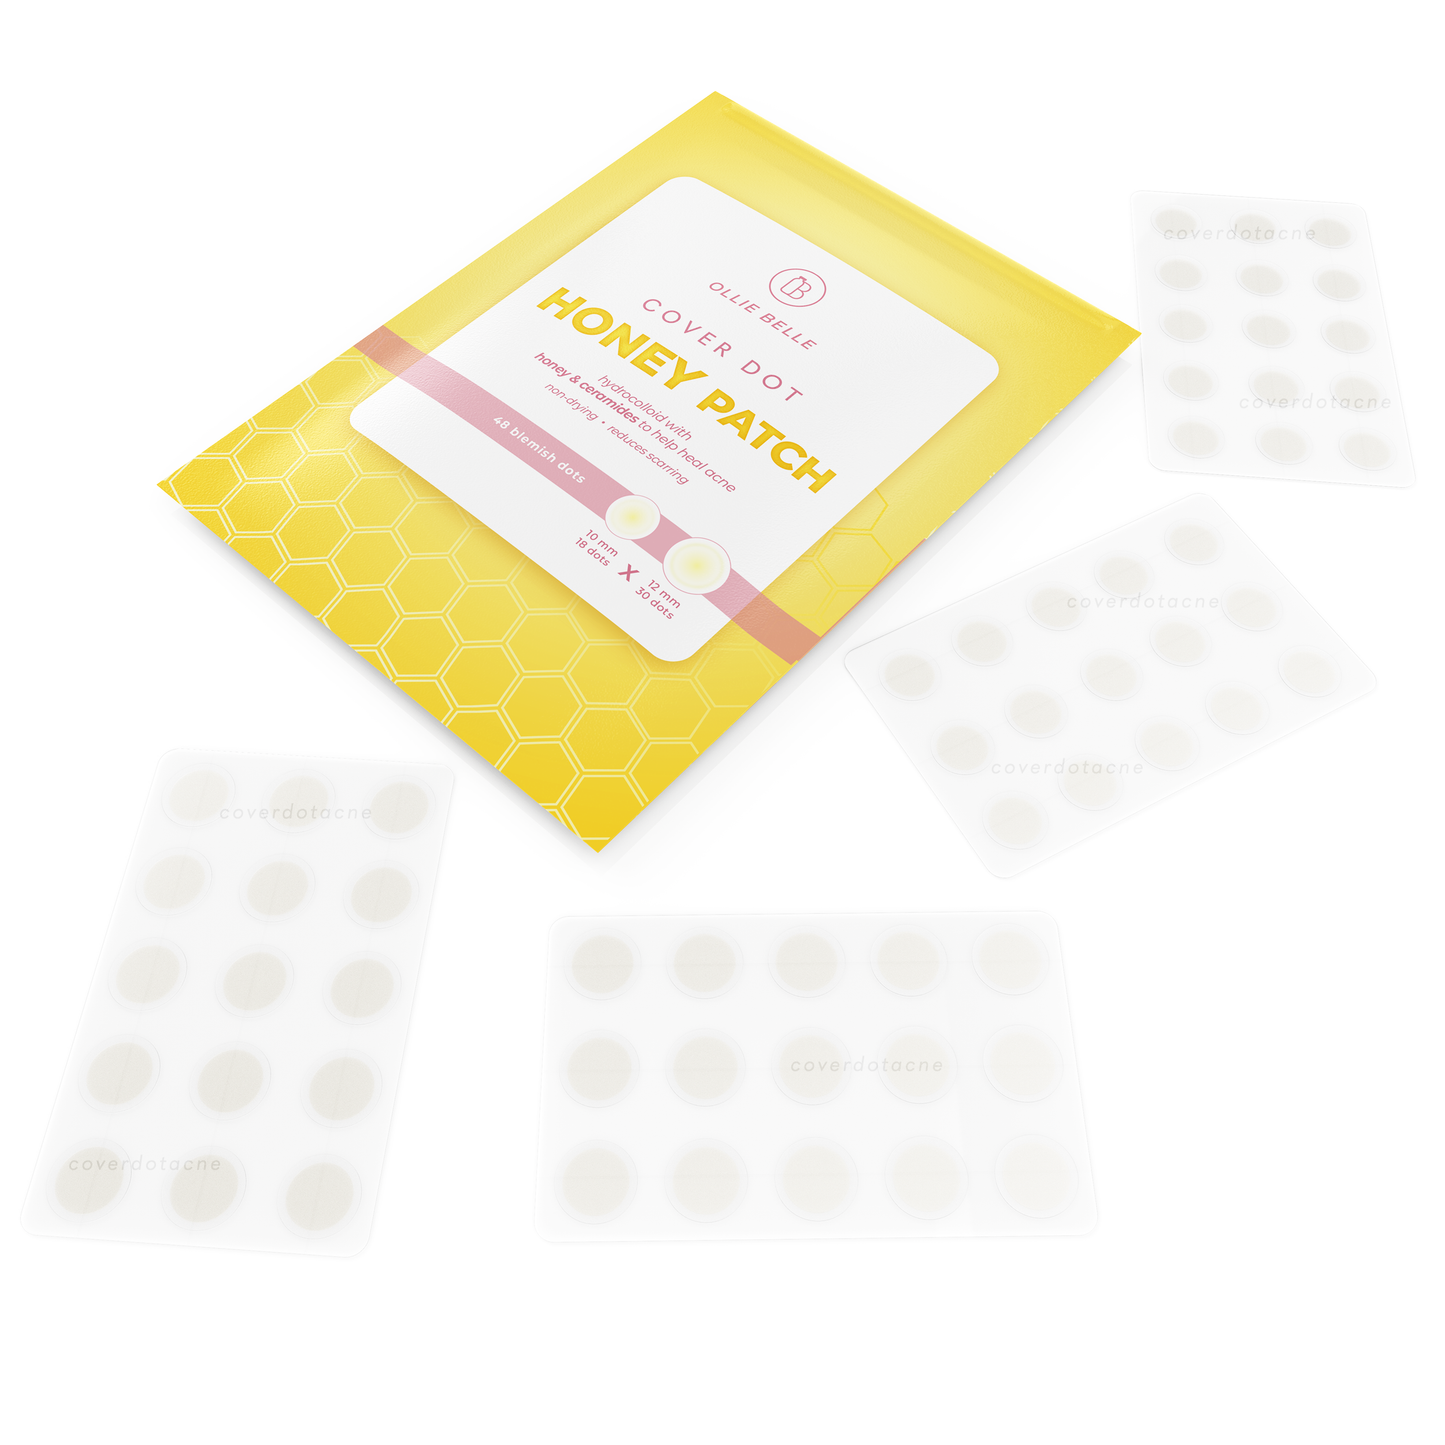 Cover Dot Honey Patch 48 Hydrocolloid Acne Patches Infused with Honey 2 Sizes 10mm and 12mm